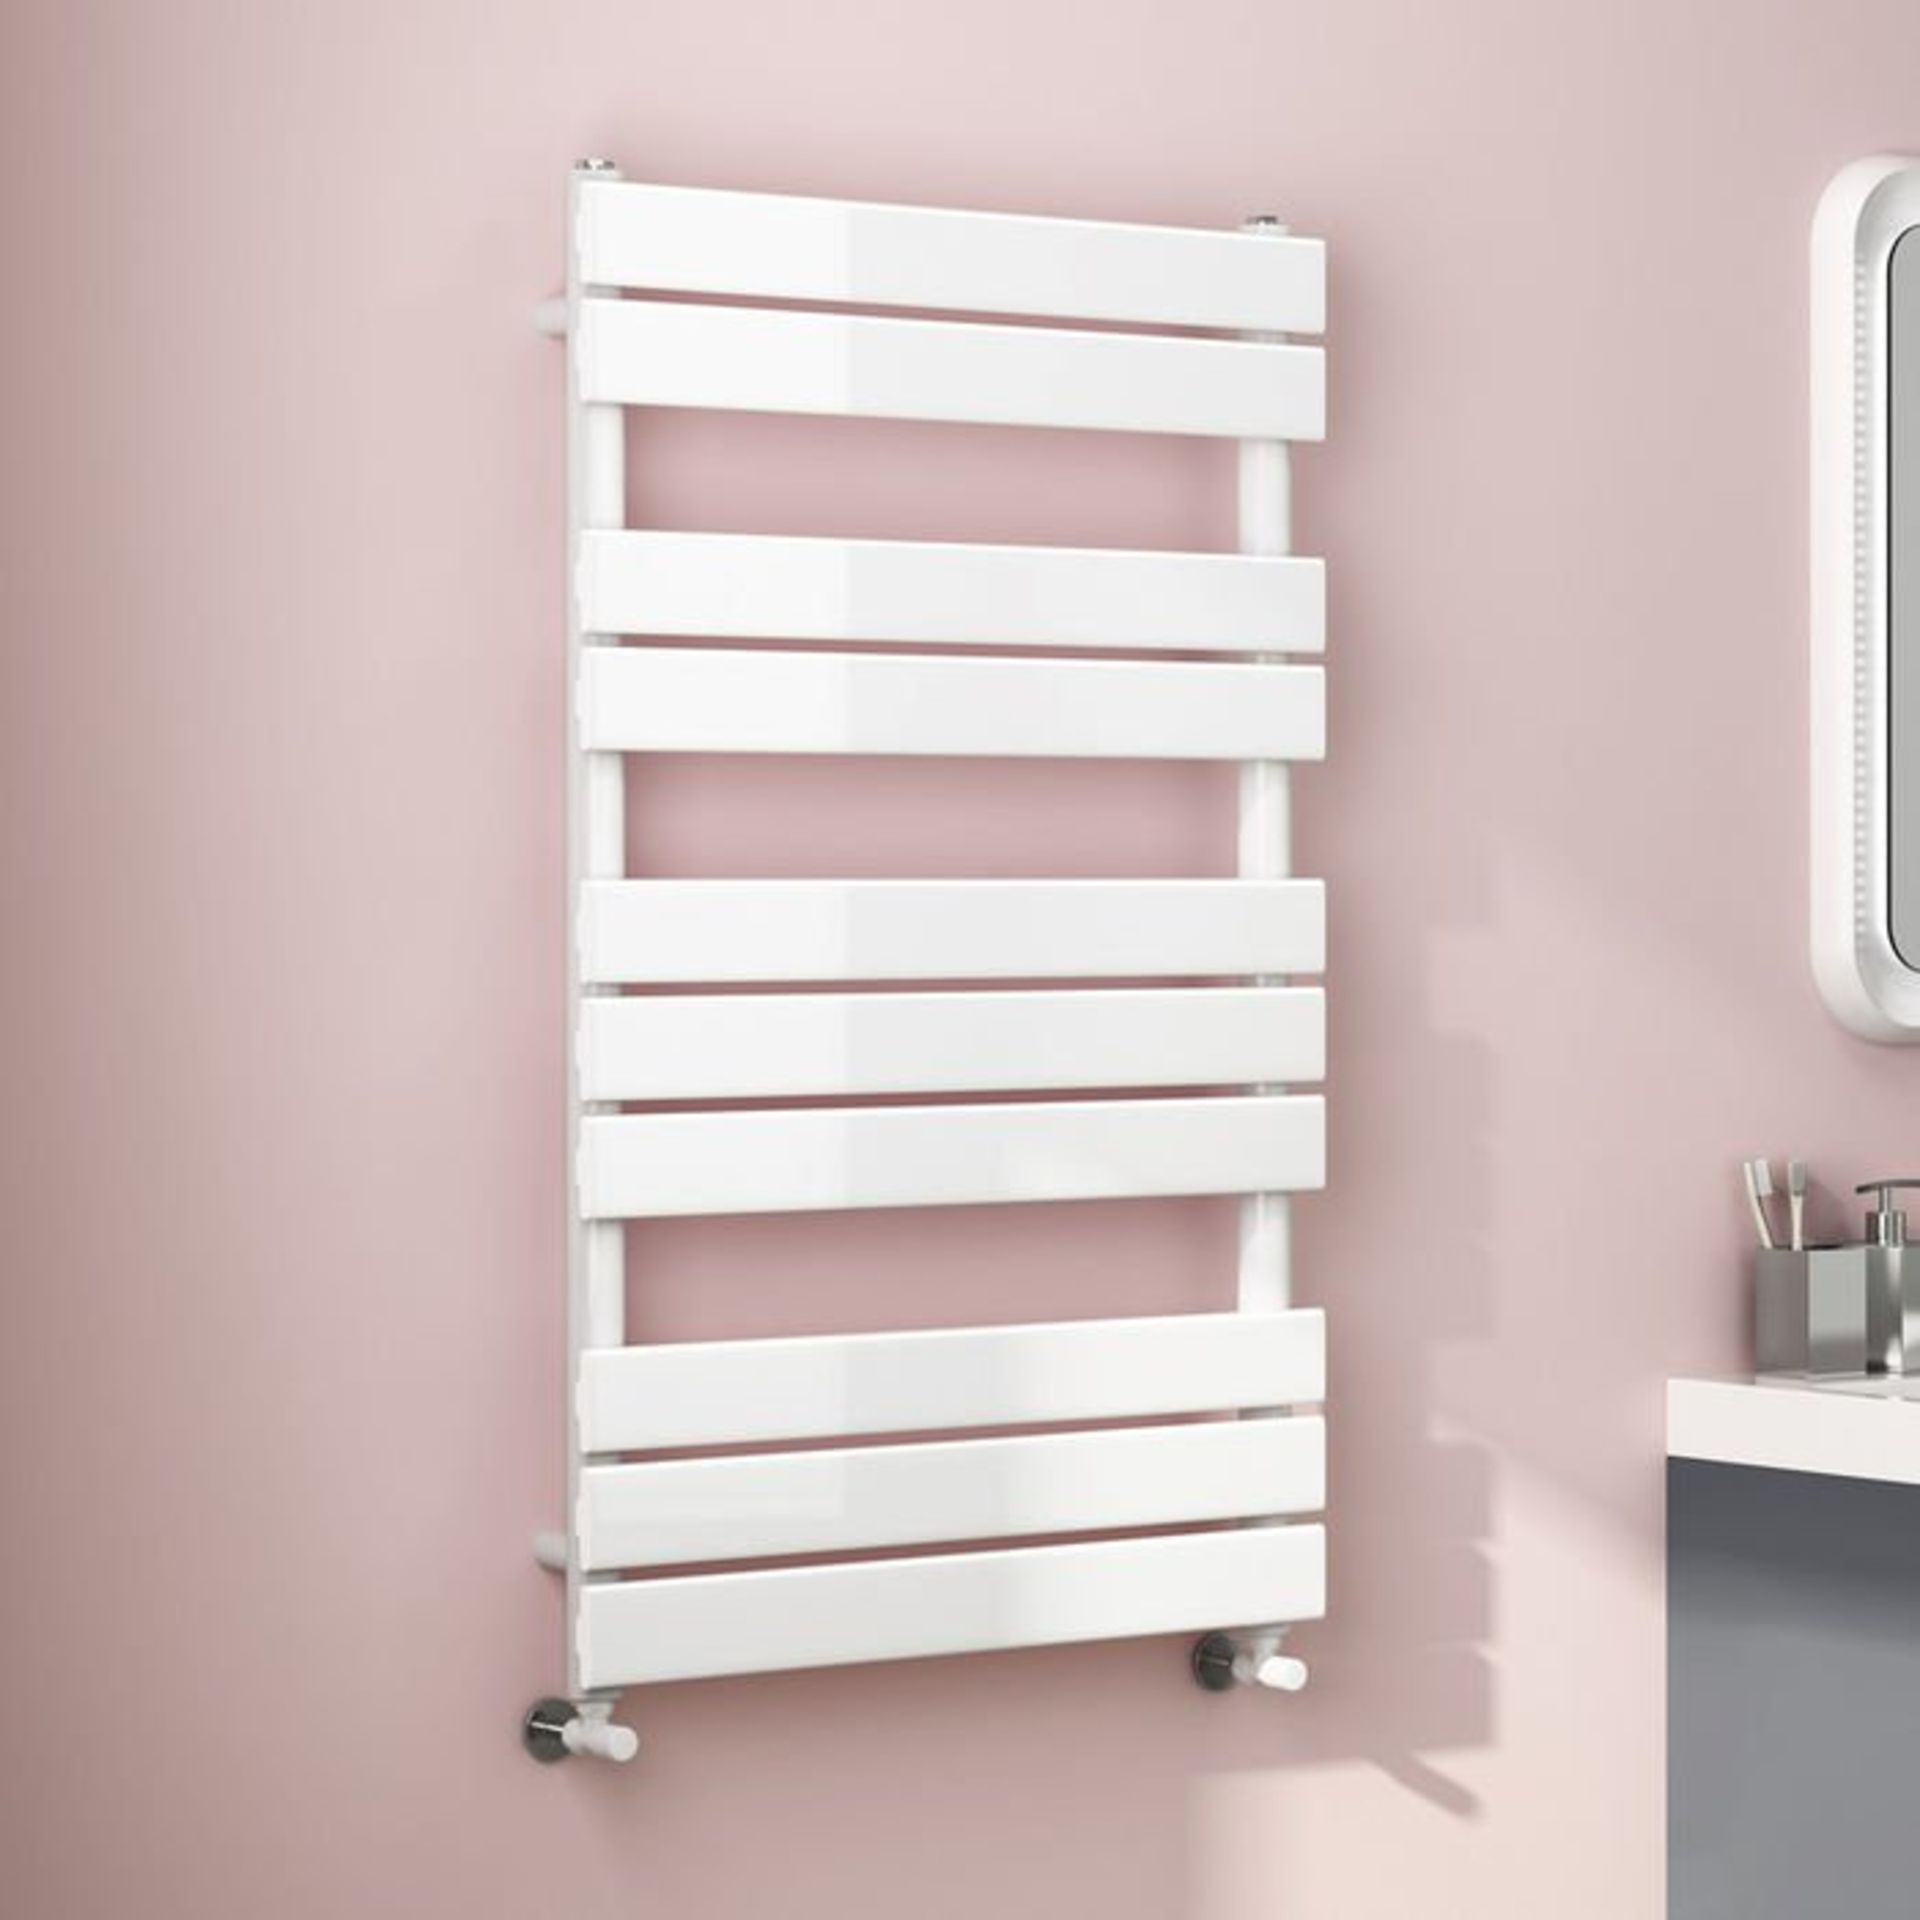 (S152) 1000x600mm White Flat Panel Ladder Towel Radiator RRP £214.99 Low carbon steel, high